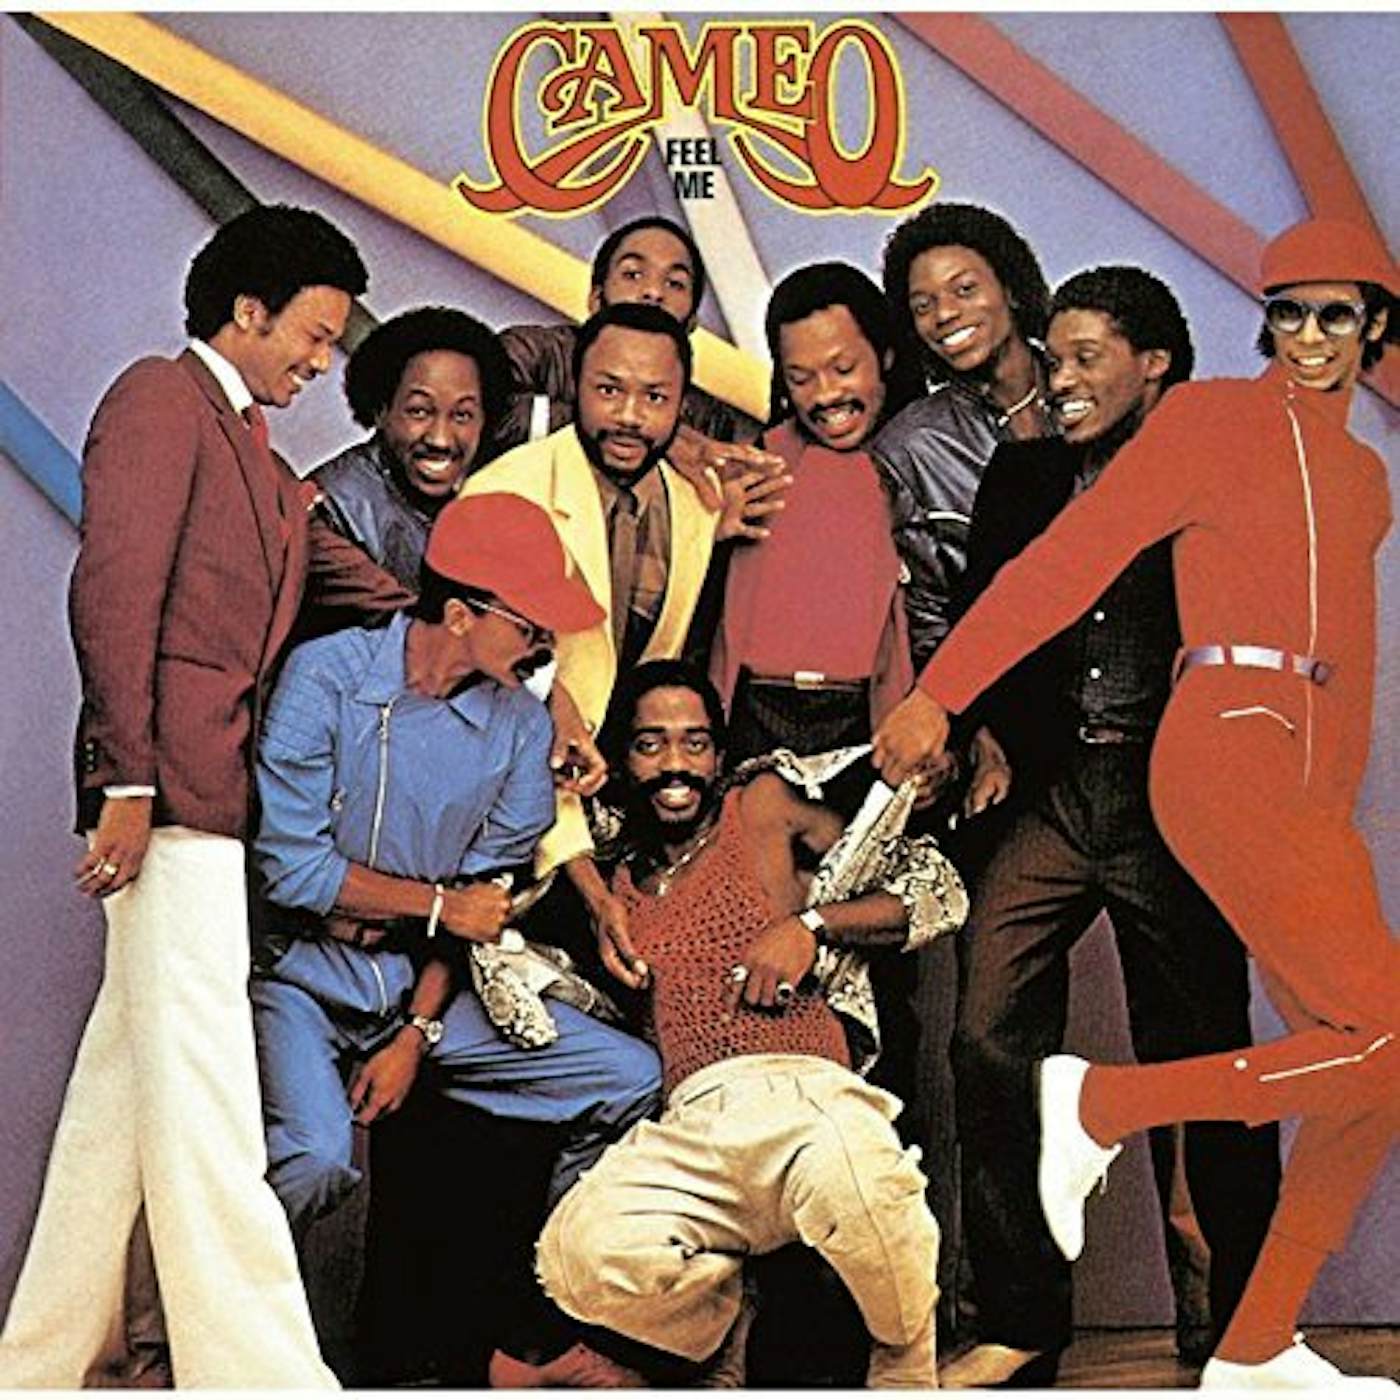 Cameo FEEL ME: LIMITED CD